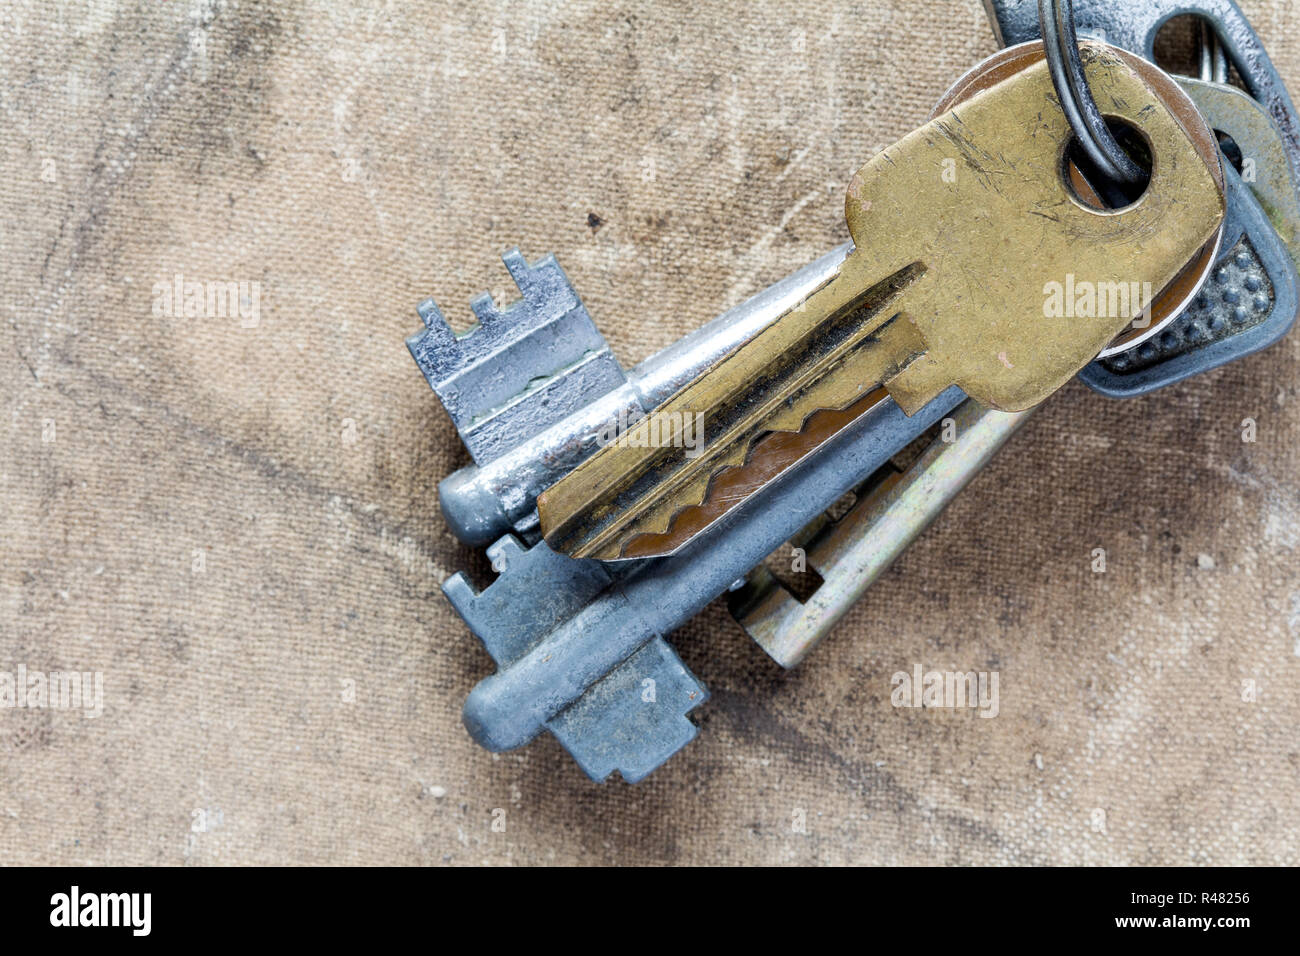 Old keys on dirty canvas Stock Photo